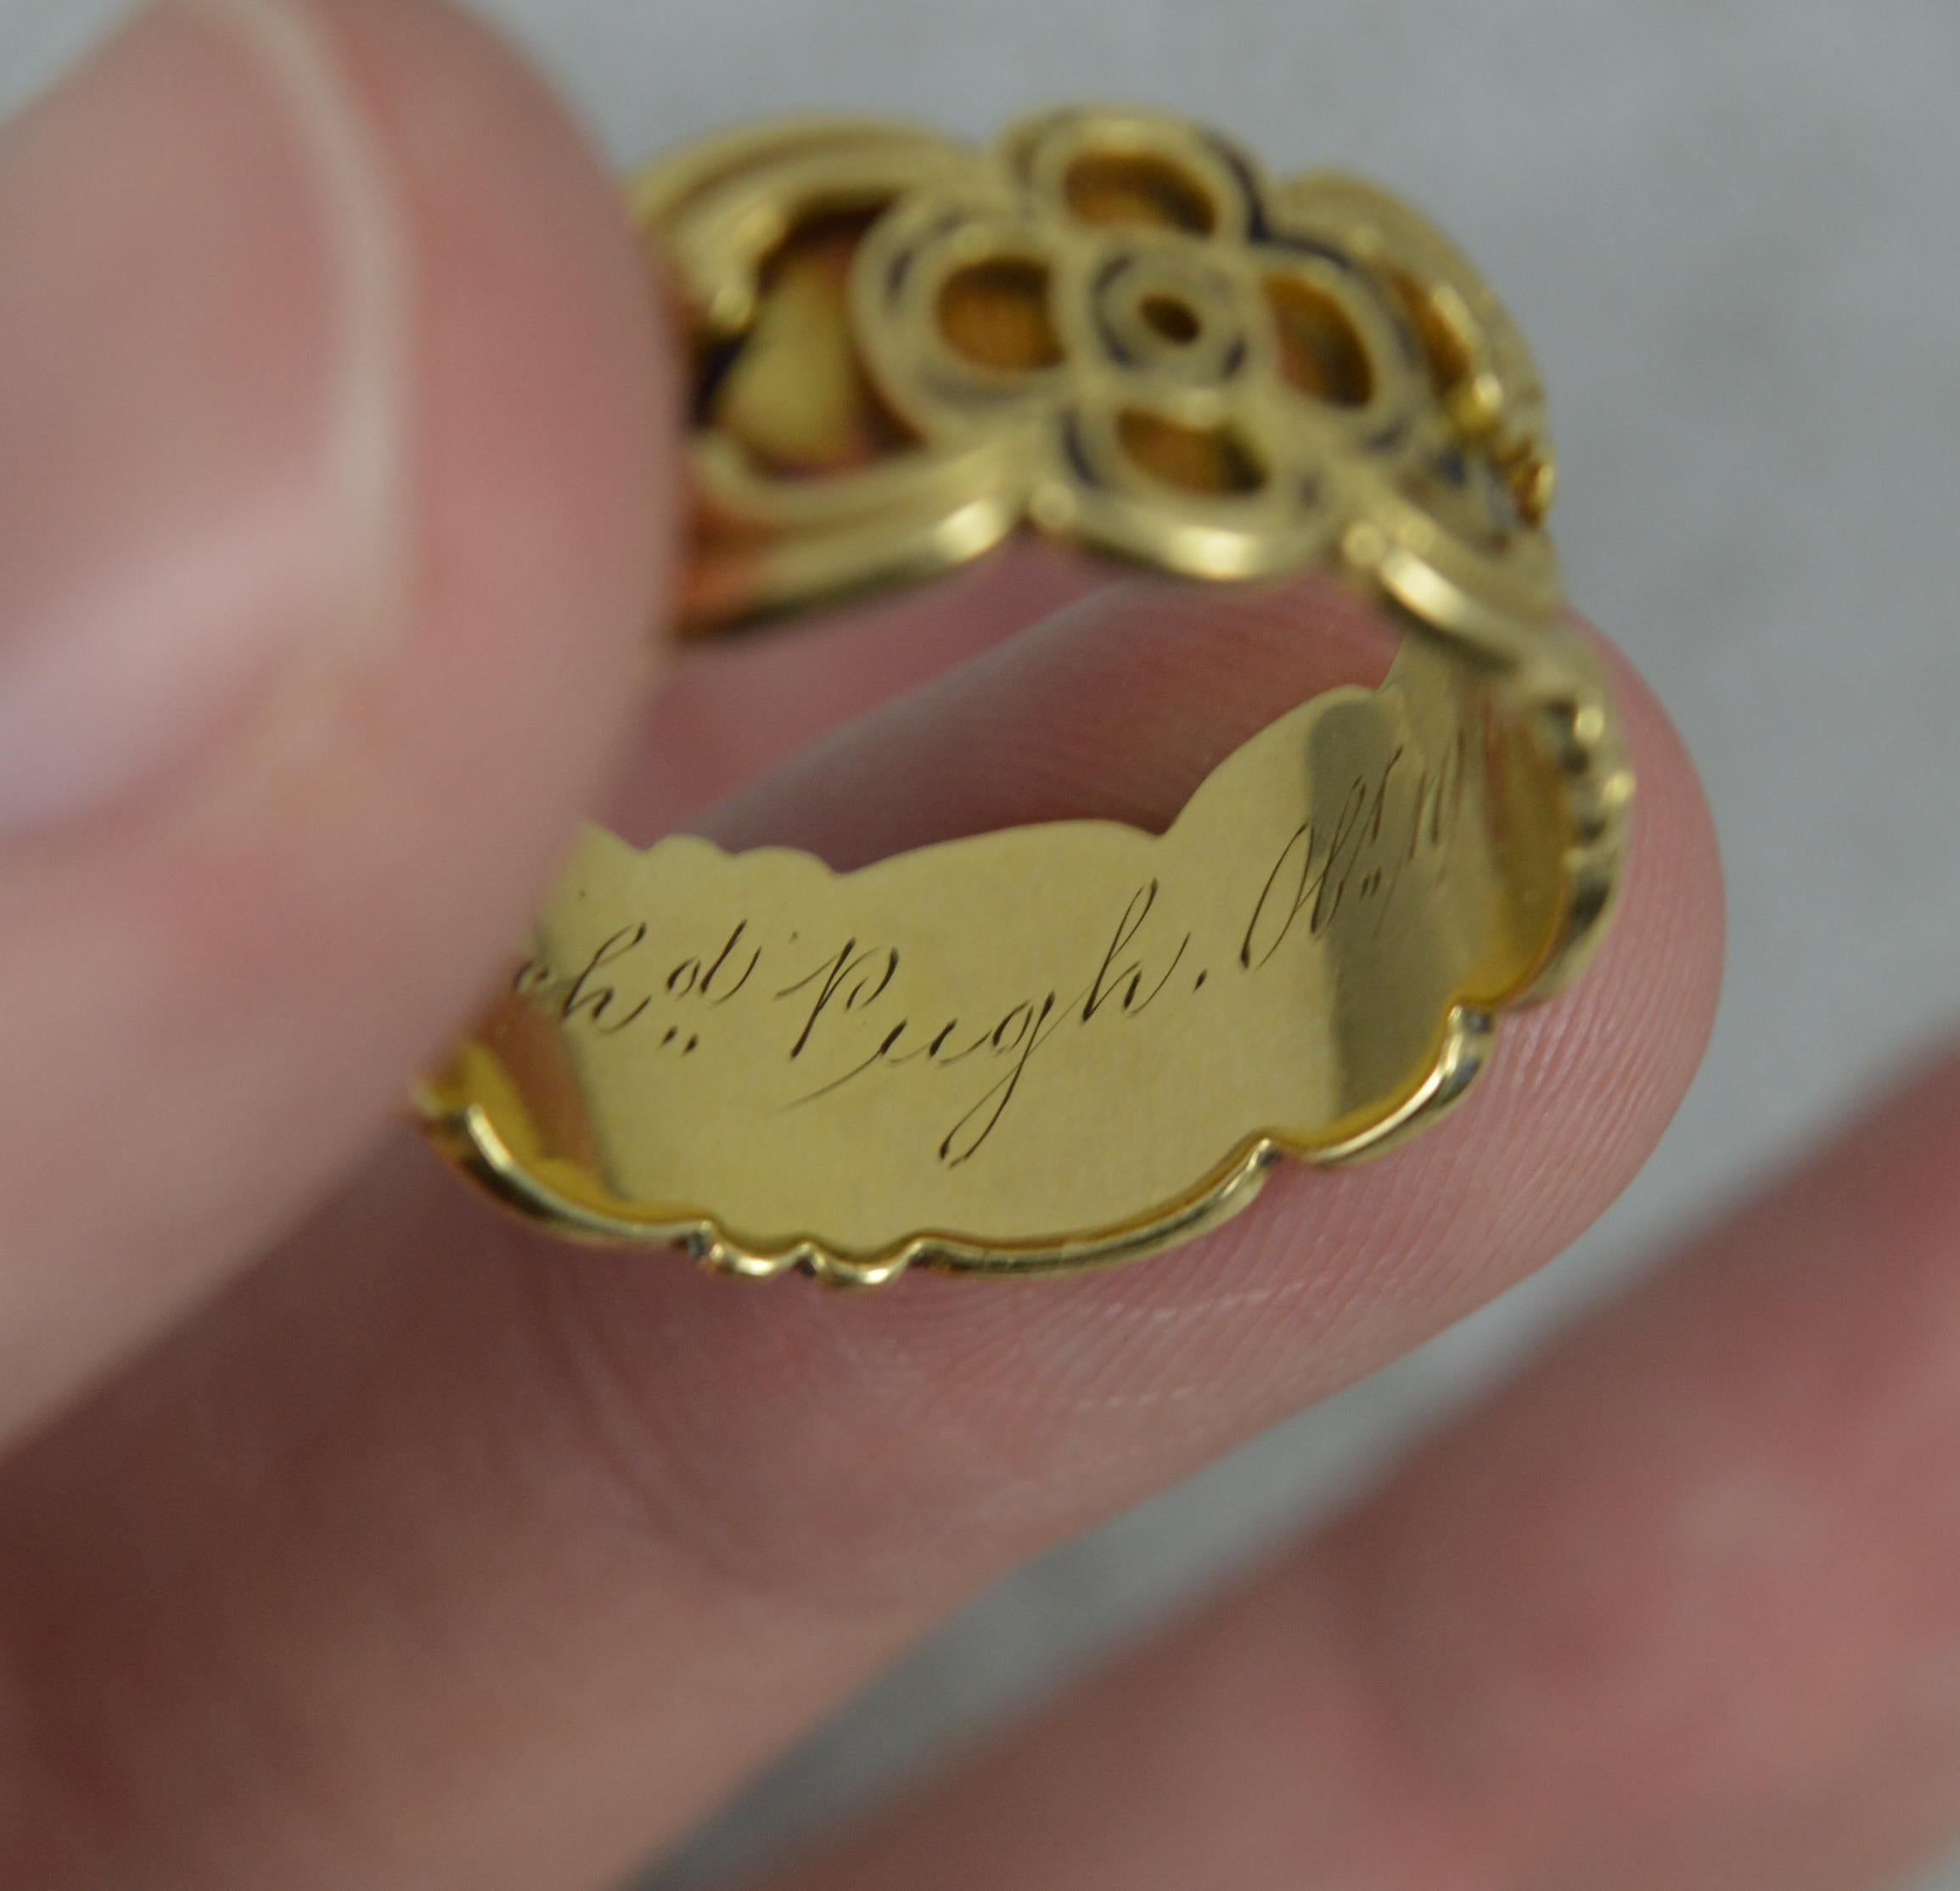 1842 Victorian 18 Carat Gold Enamel In Memory of Mourning Band Ring 1